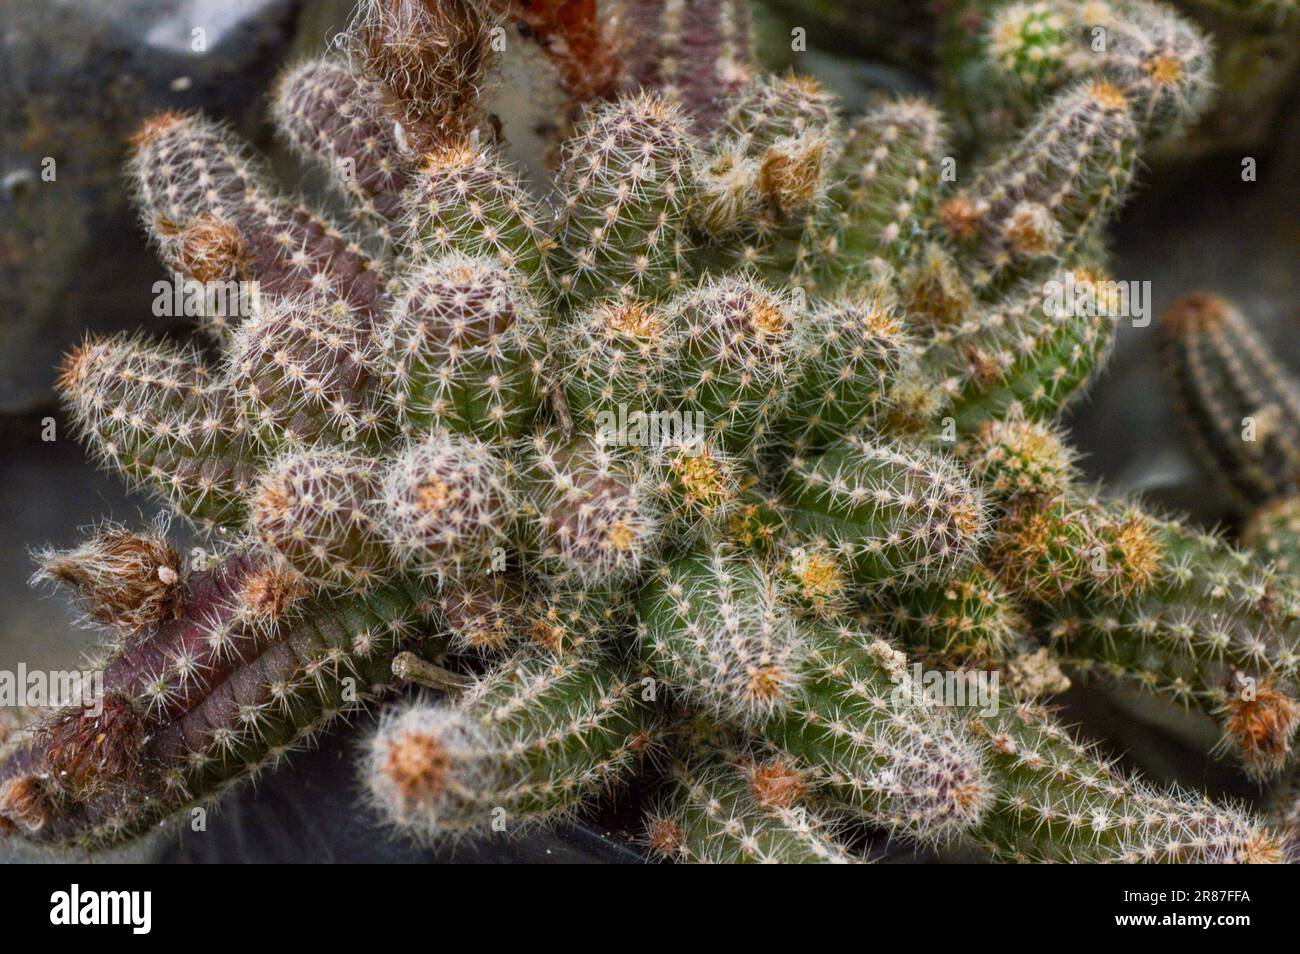 Lobivia aurea is a small cactus with solitary or branched stems with many basal and lateral offshoots. Stock Photo